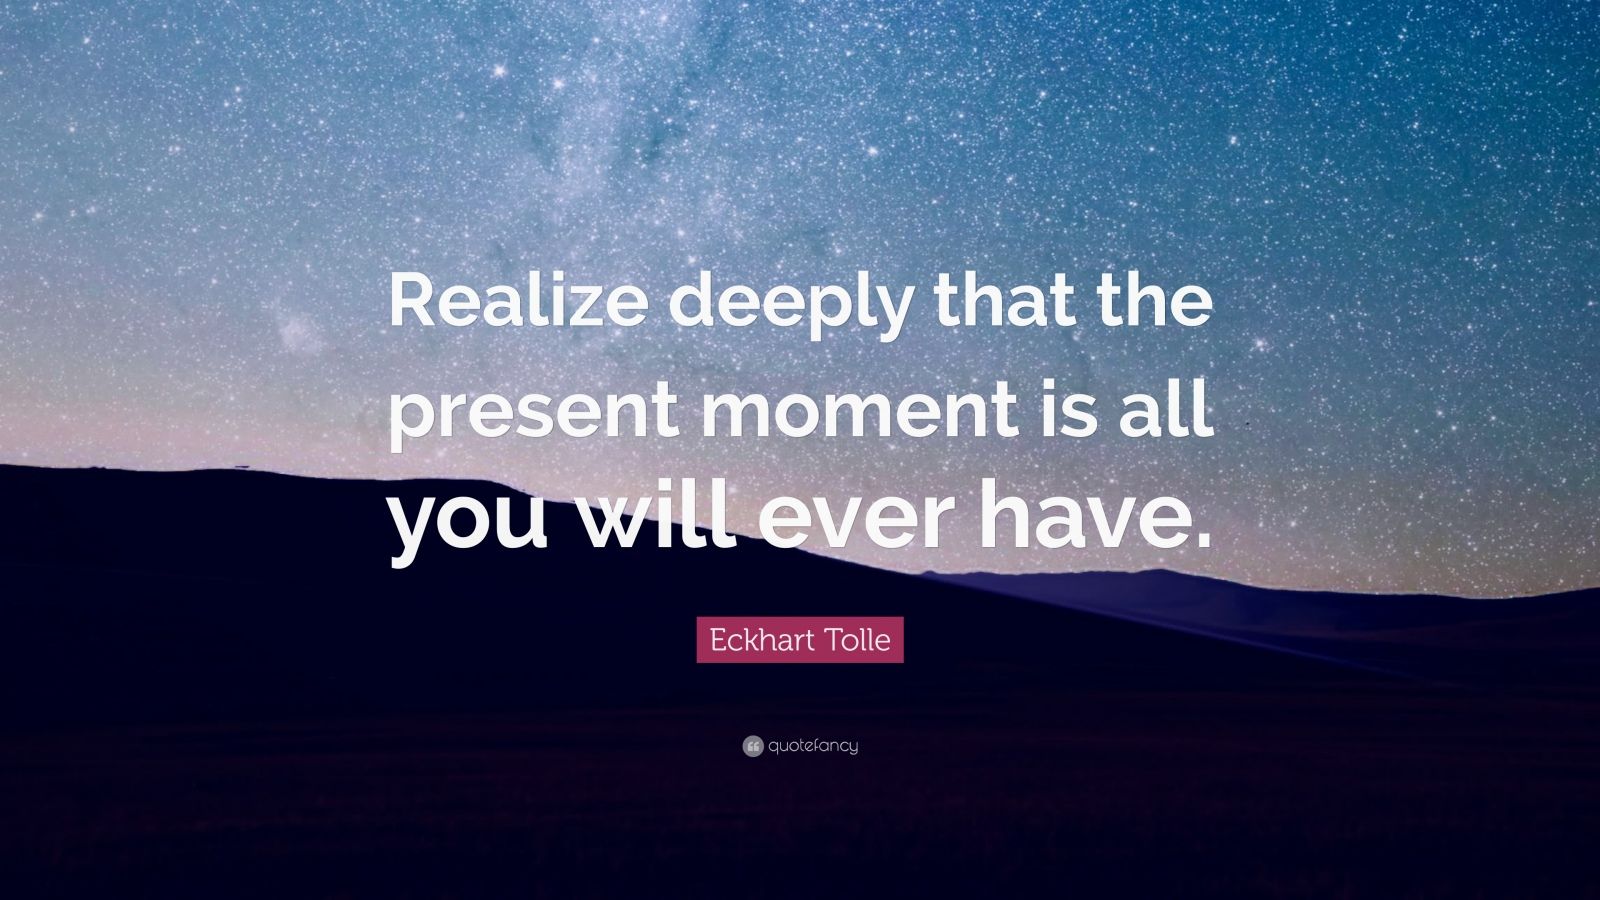 Eckhart Tolle Quote: “Realize deeply that the present moment is all you ...